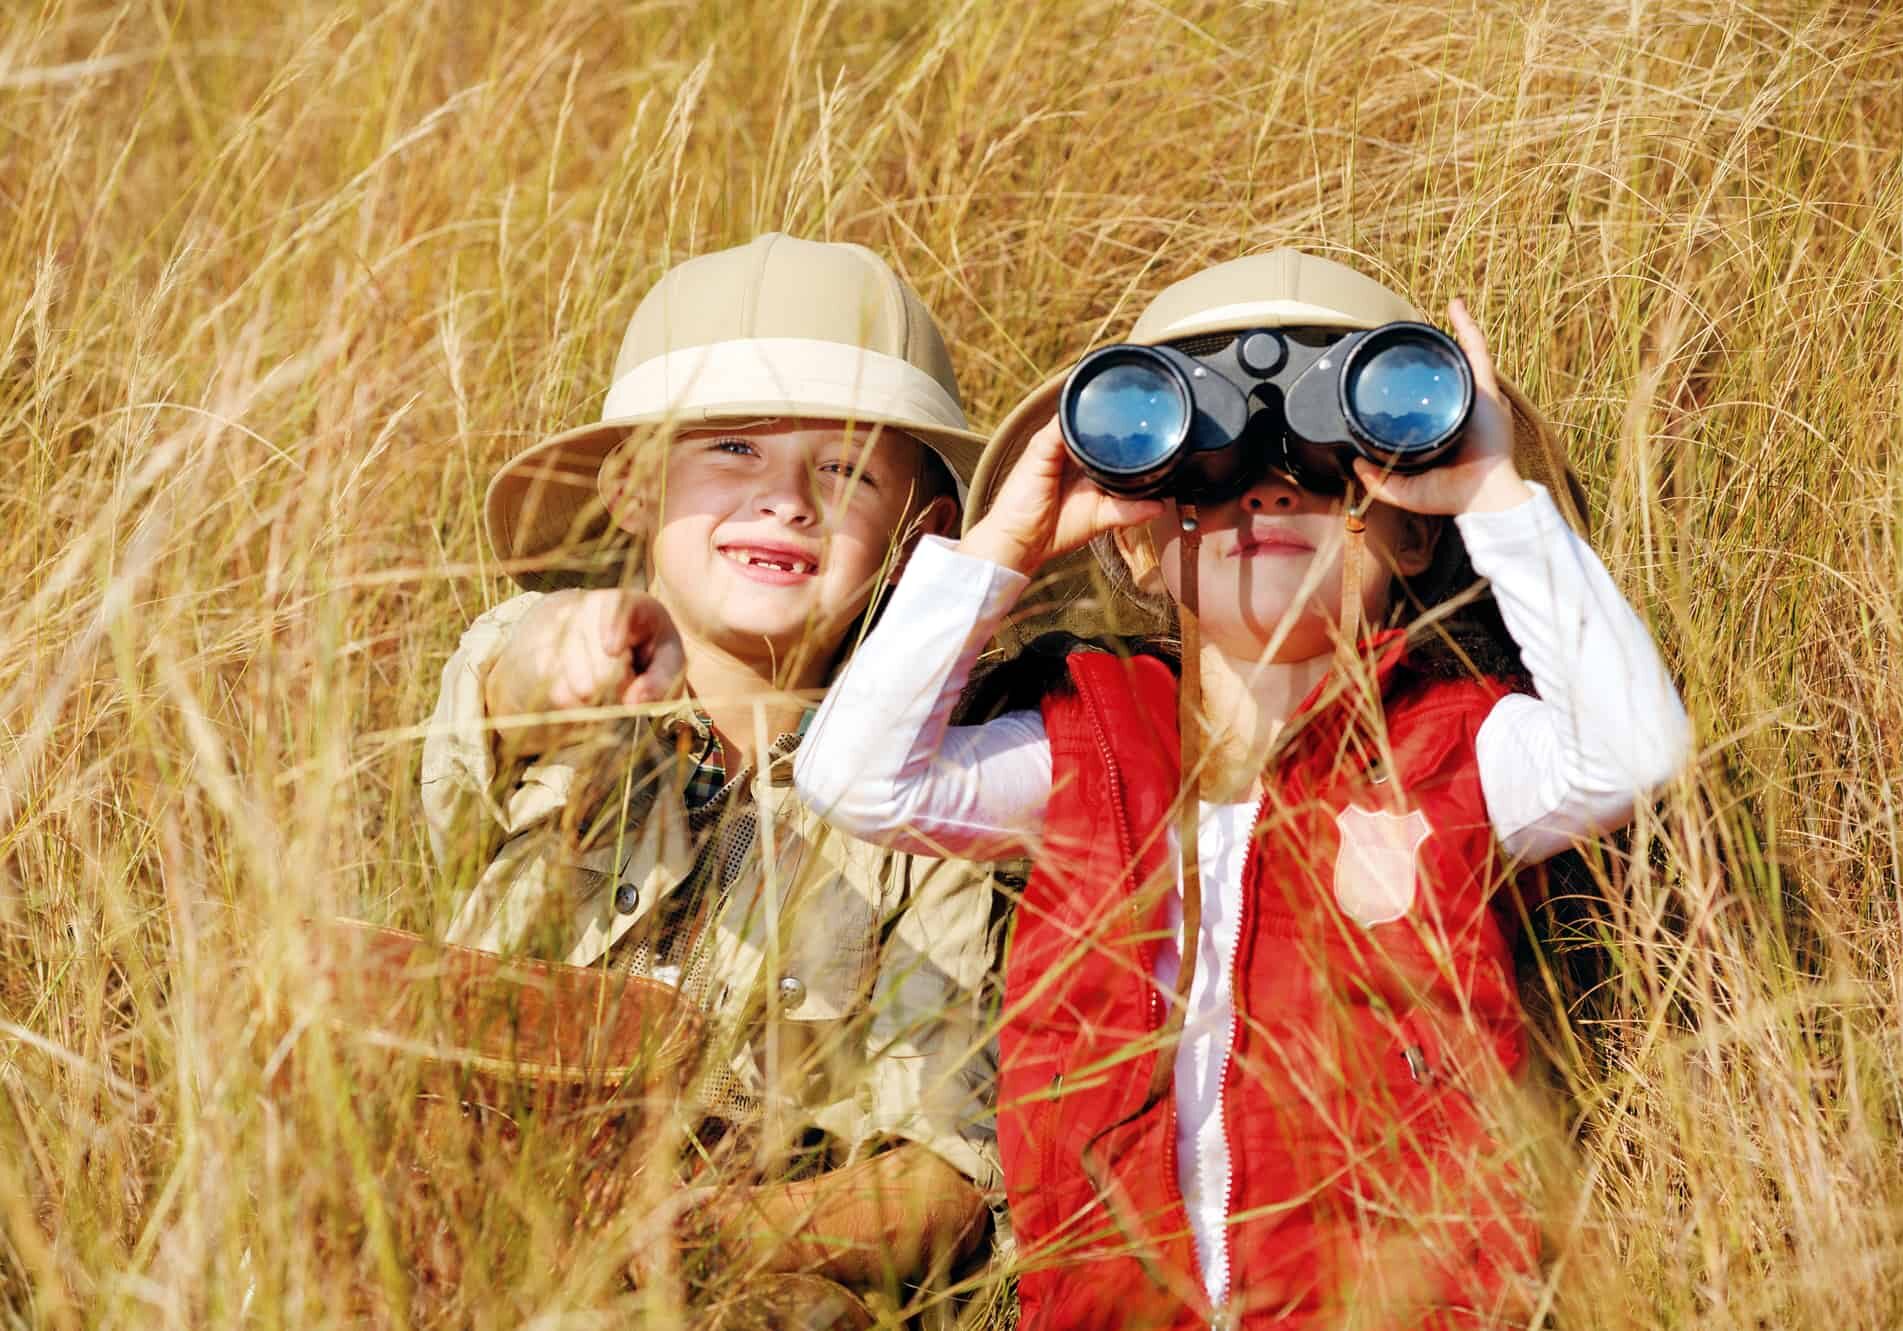 Happy young safari adventure children playing outdoors in the grass with binoculars and exploring together as brother and sister.